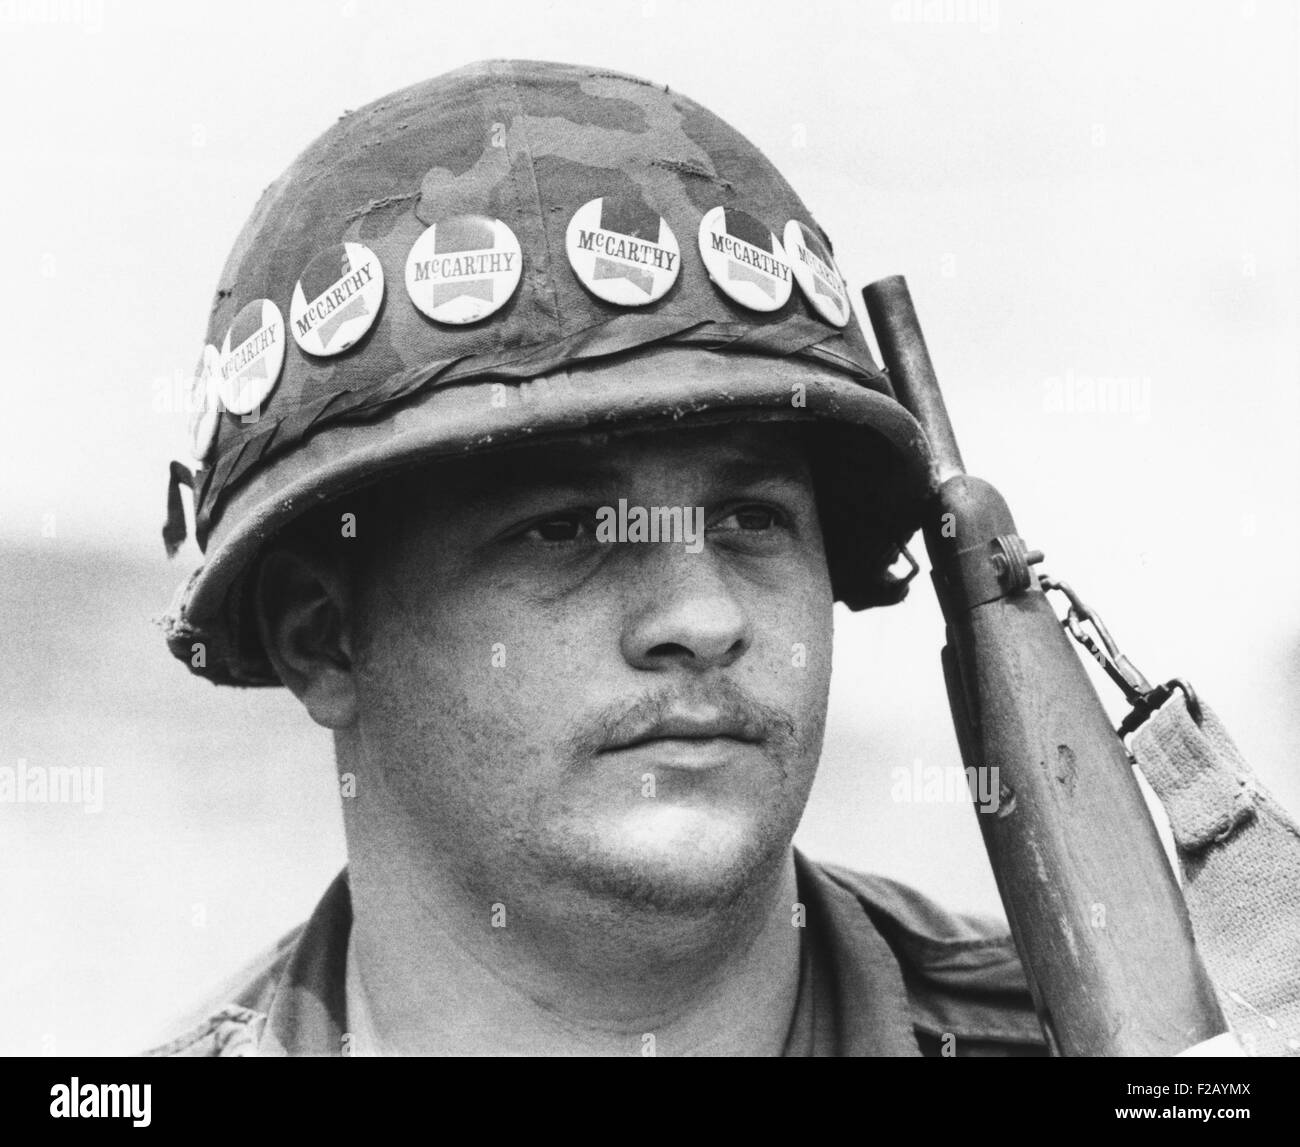 American soldier at Quan Loi, Vietnam, was a supporter of Eugene McCarthy for President. April 20, 1968. Democratic Anti-War Senator Eugene McCarthy won 42.2% to President Johnson's 49.4% in the New Hampshire Primary. This ultimately caused LBJ's withdrawal from seeking re-election. (CSU 2015 9 738) Stock Photo